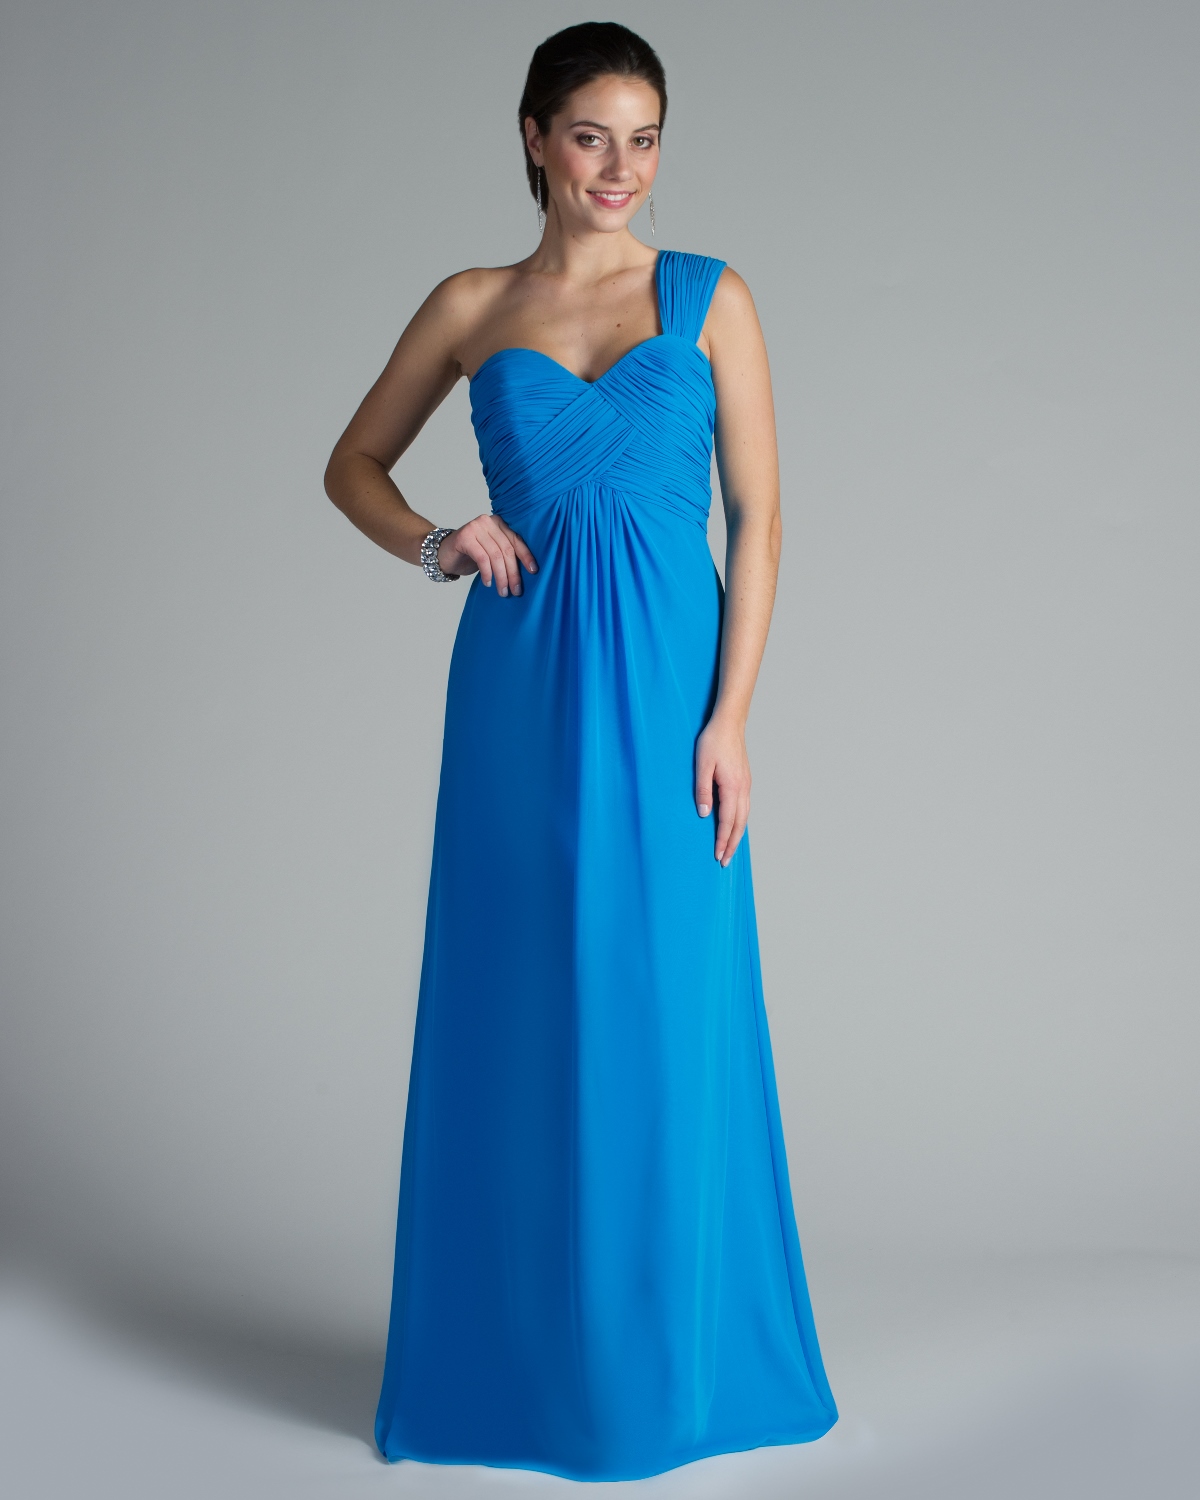 Bridesmaid Dress - Nite Time Collection: NT-82 - Shown in #13 chiffon ...